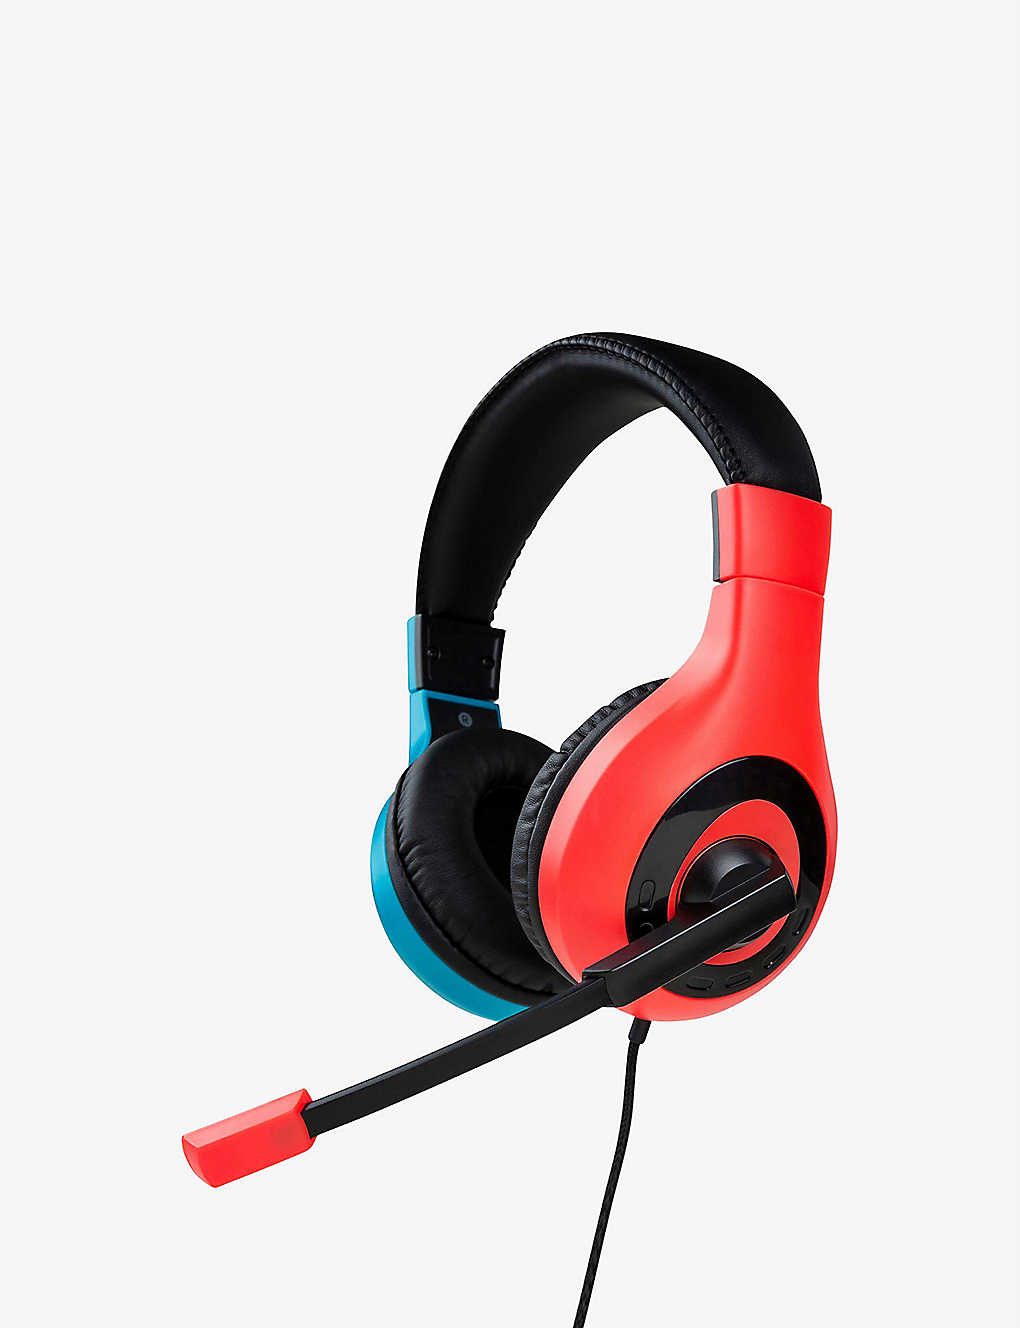 Say aside banner Sympton NACON - Neon Nintendo Switch wired stereo headset | Selfridges.com